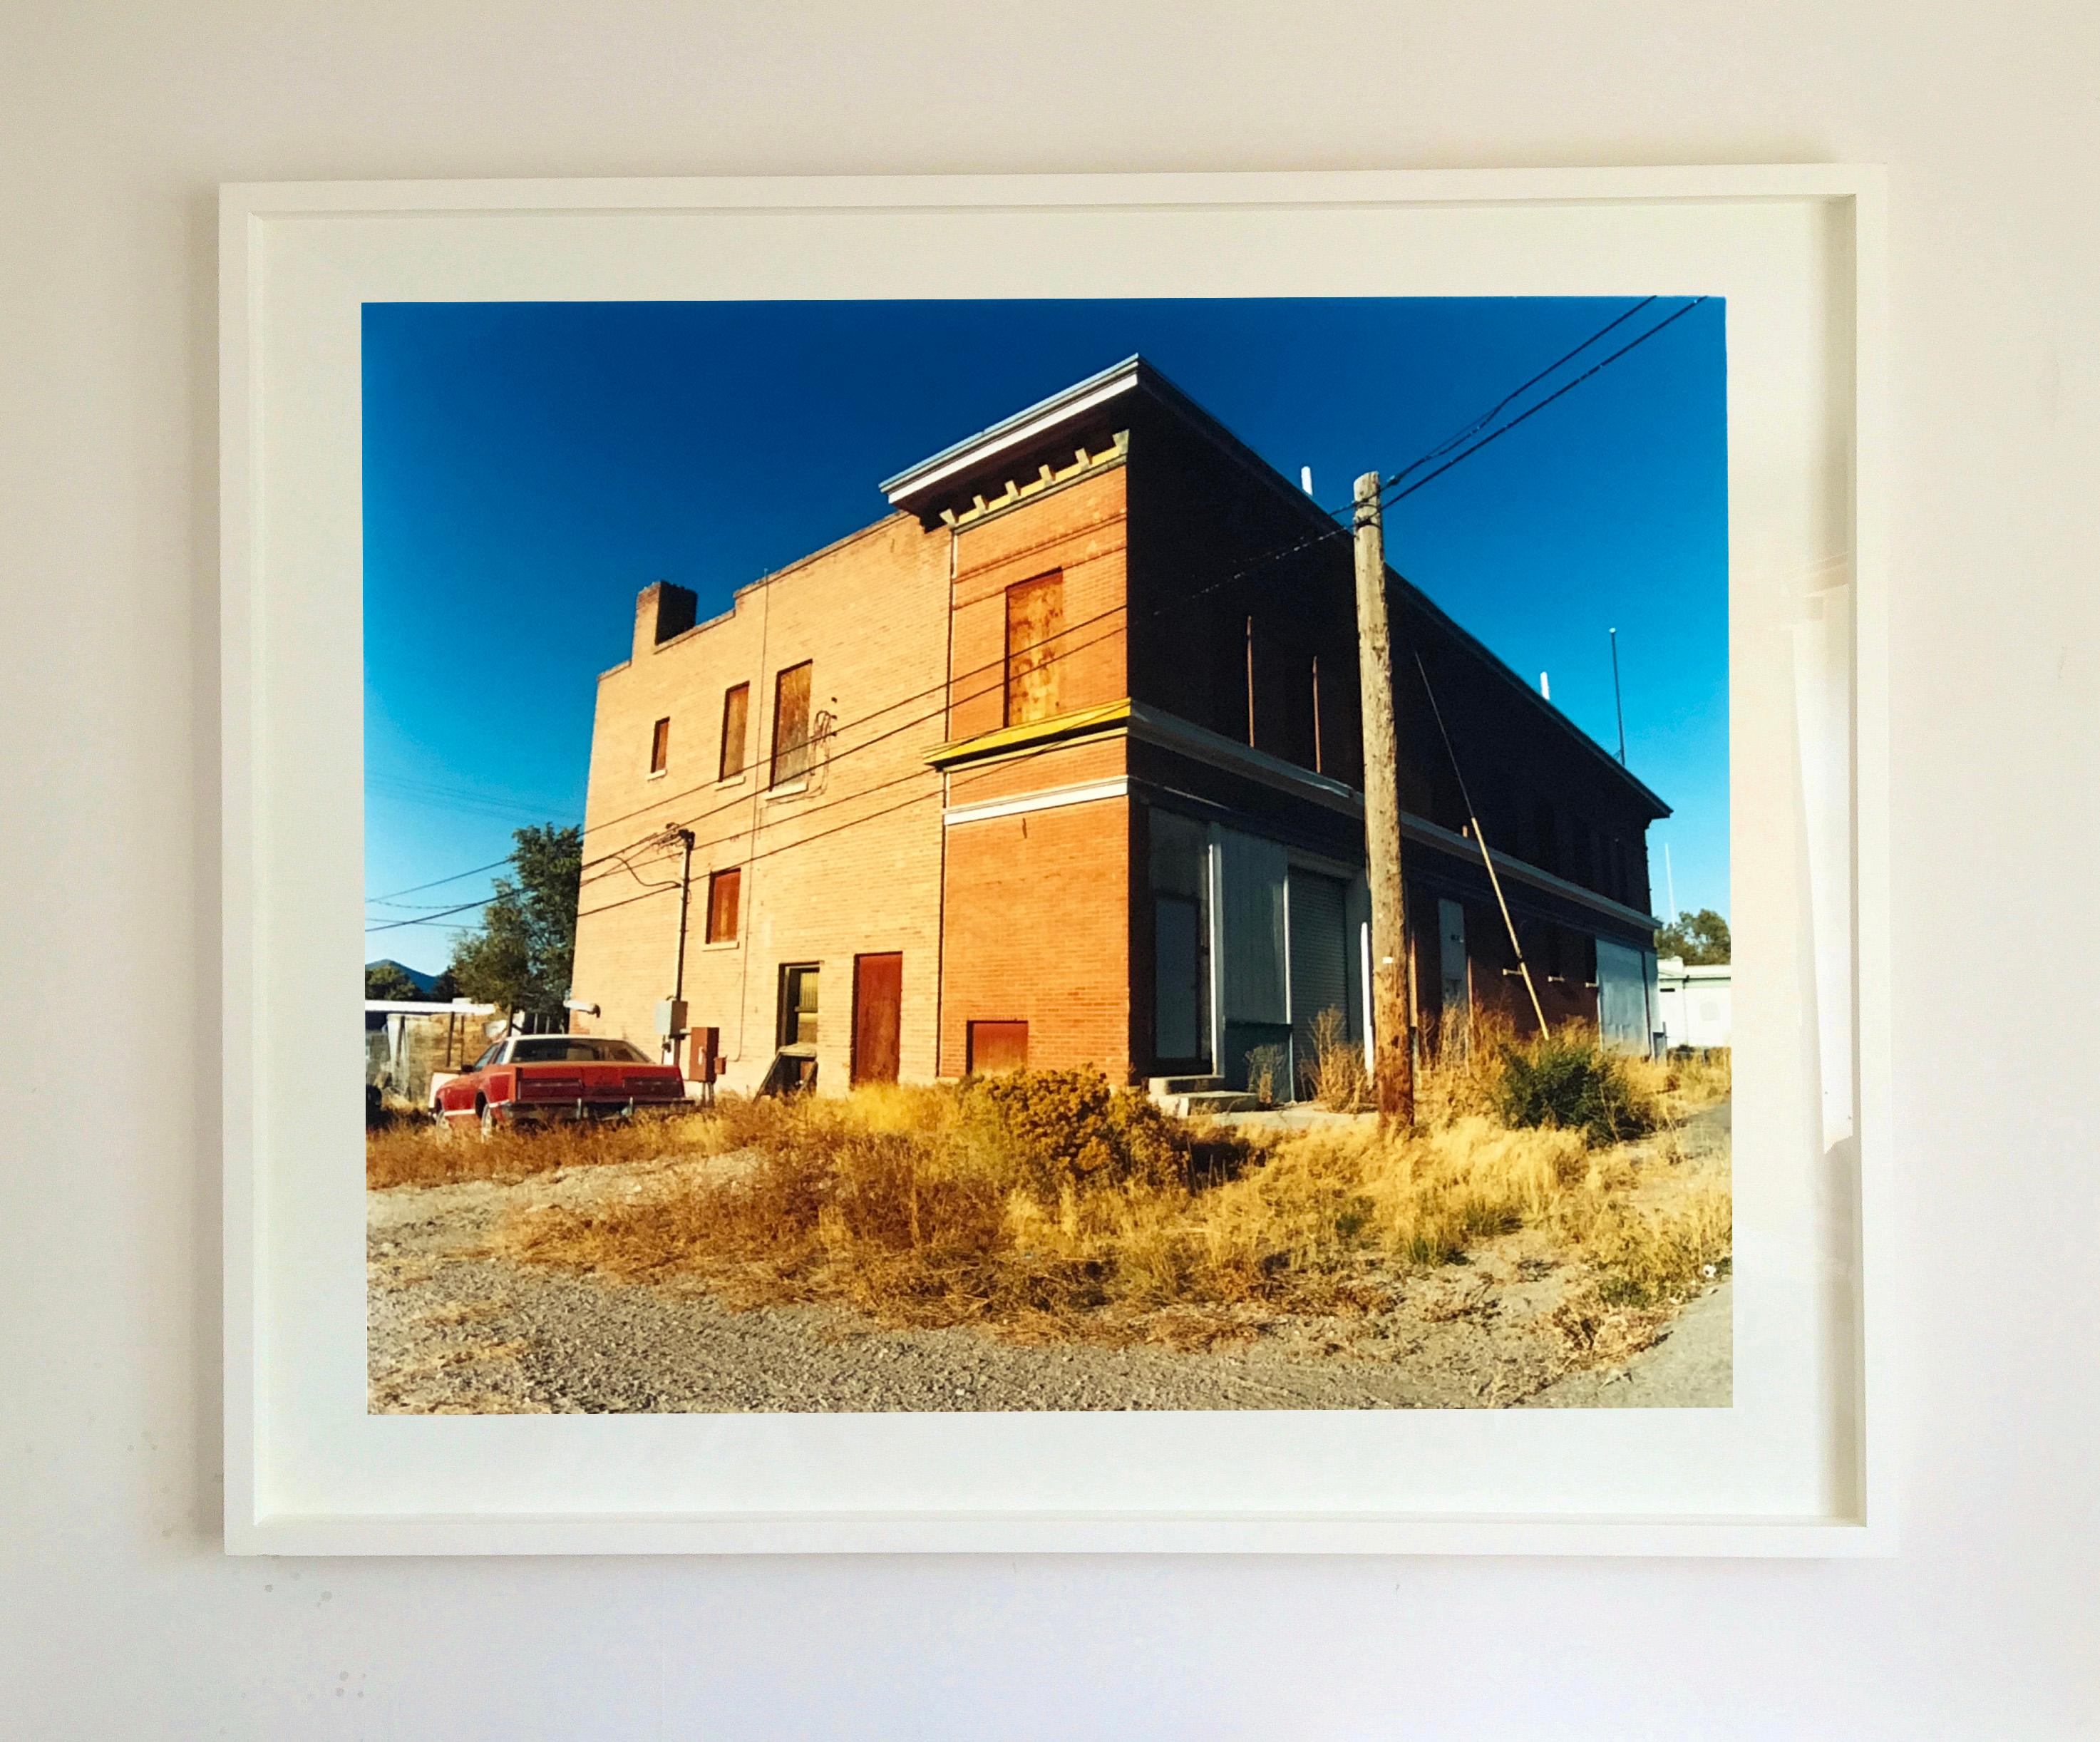 'High Street', Ely, Nevada - After the Gold Rush - Architecture Color Photo - Black Print by Richard Heeps